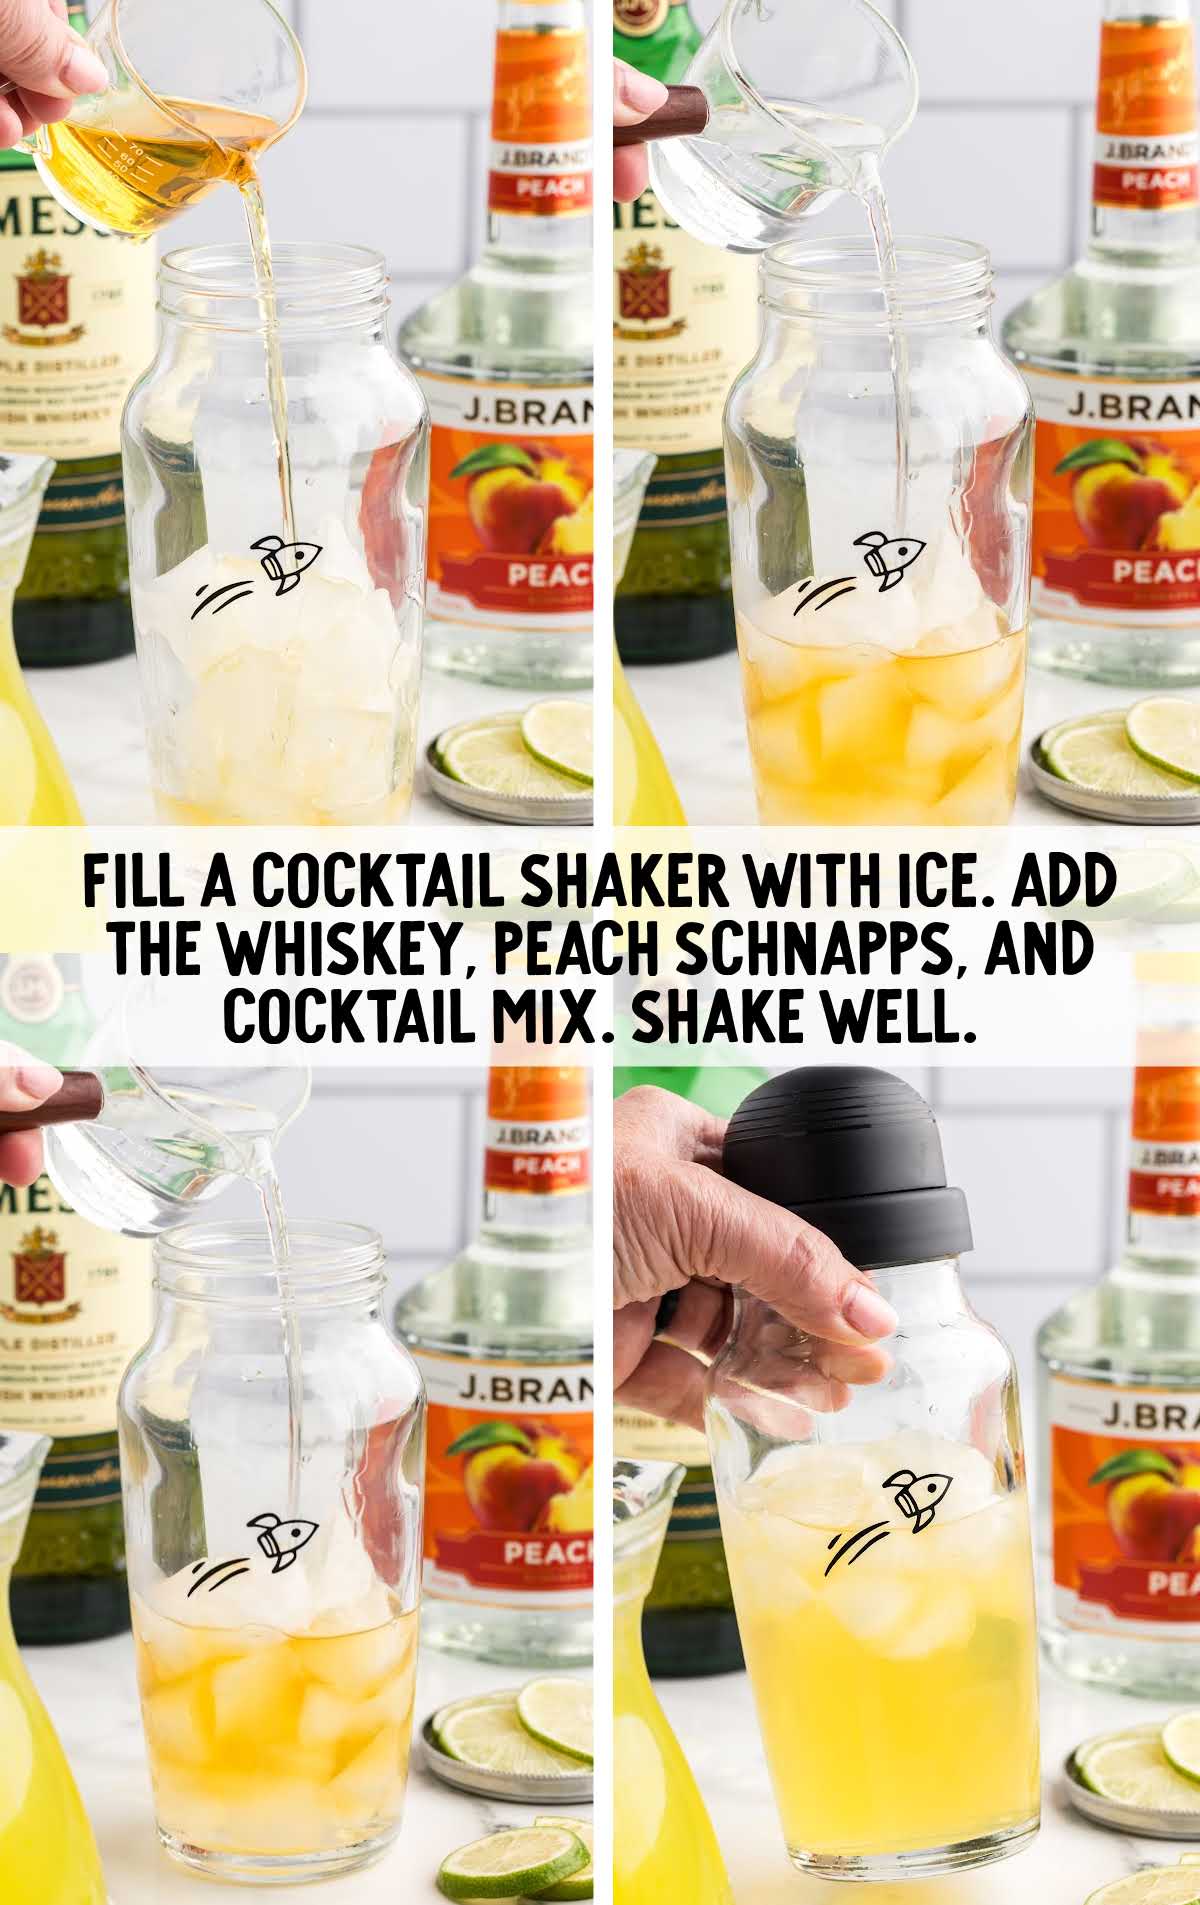 whiskey, peach, schnapps, and cocktail mix added to a cocktail shaker